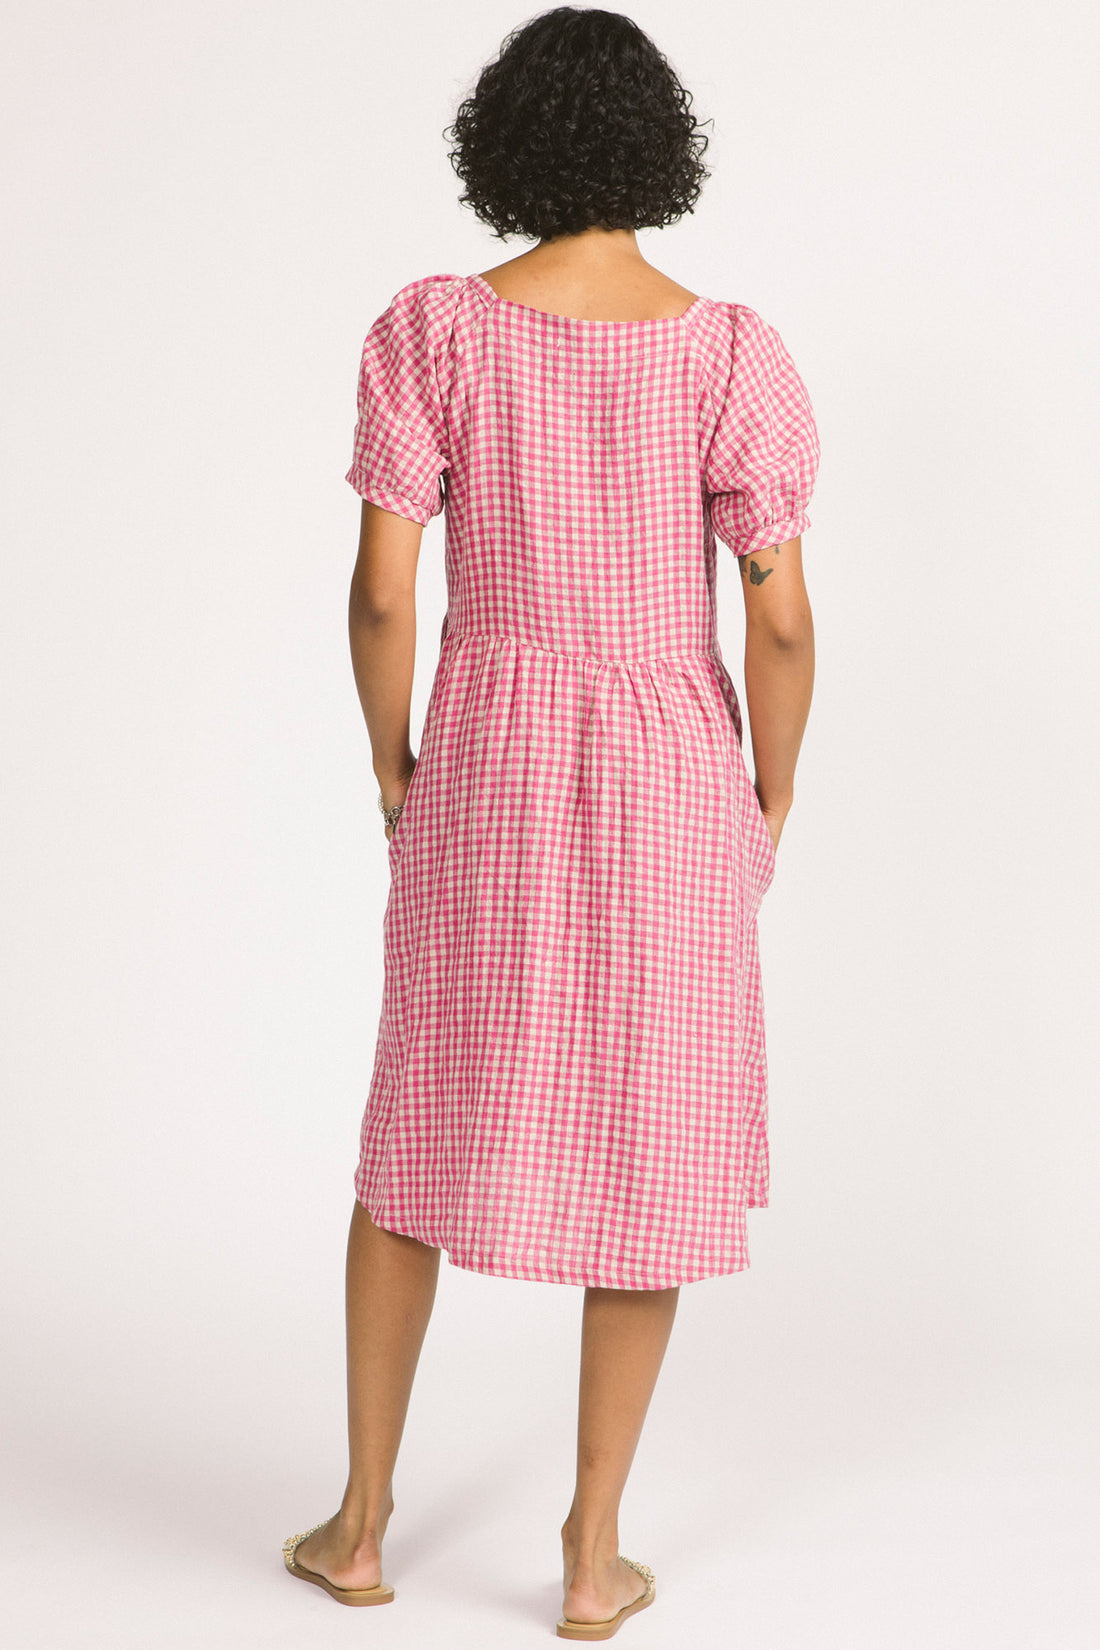 Verity Dress by Allison Wonderland, Pink Gingham, back view, V-neck, slightly puffed short sleeves with gathers at cuffs, gathers at front back and sides, below the knee length, pockets, 100% linen, sizes 2-12, made in Vancouver